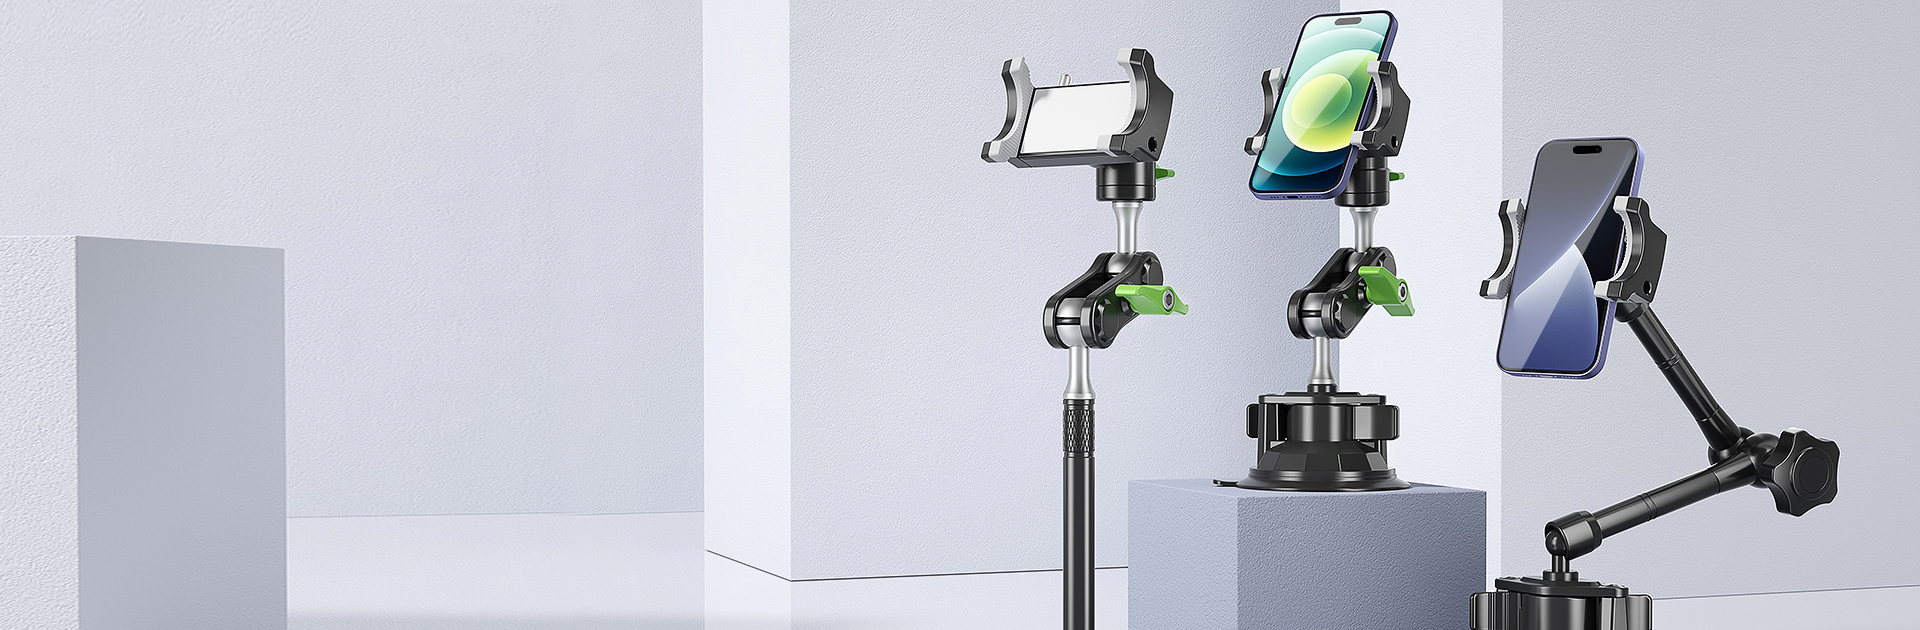 Reliable Manufacturer of Suction Cup Mounts